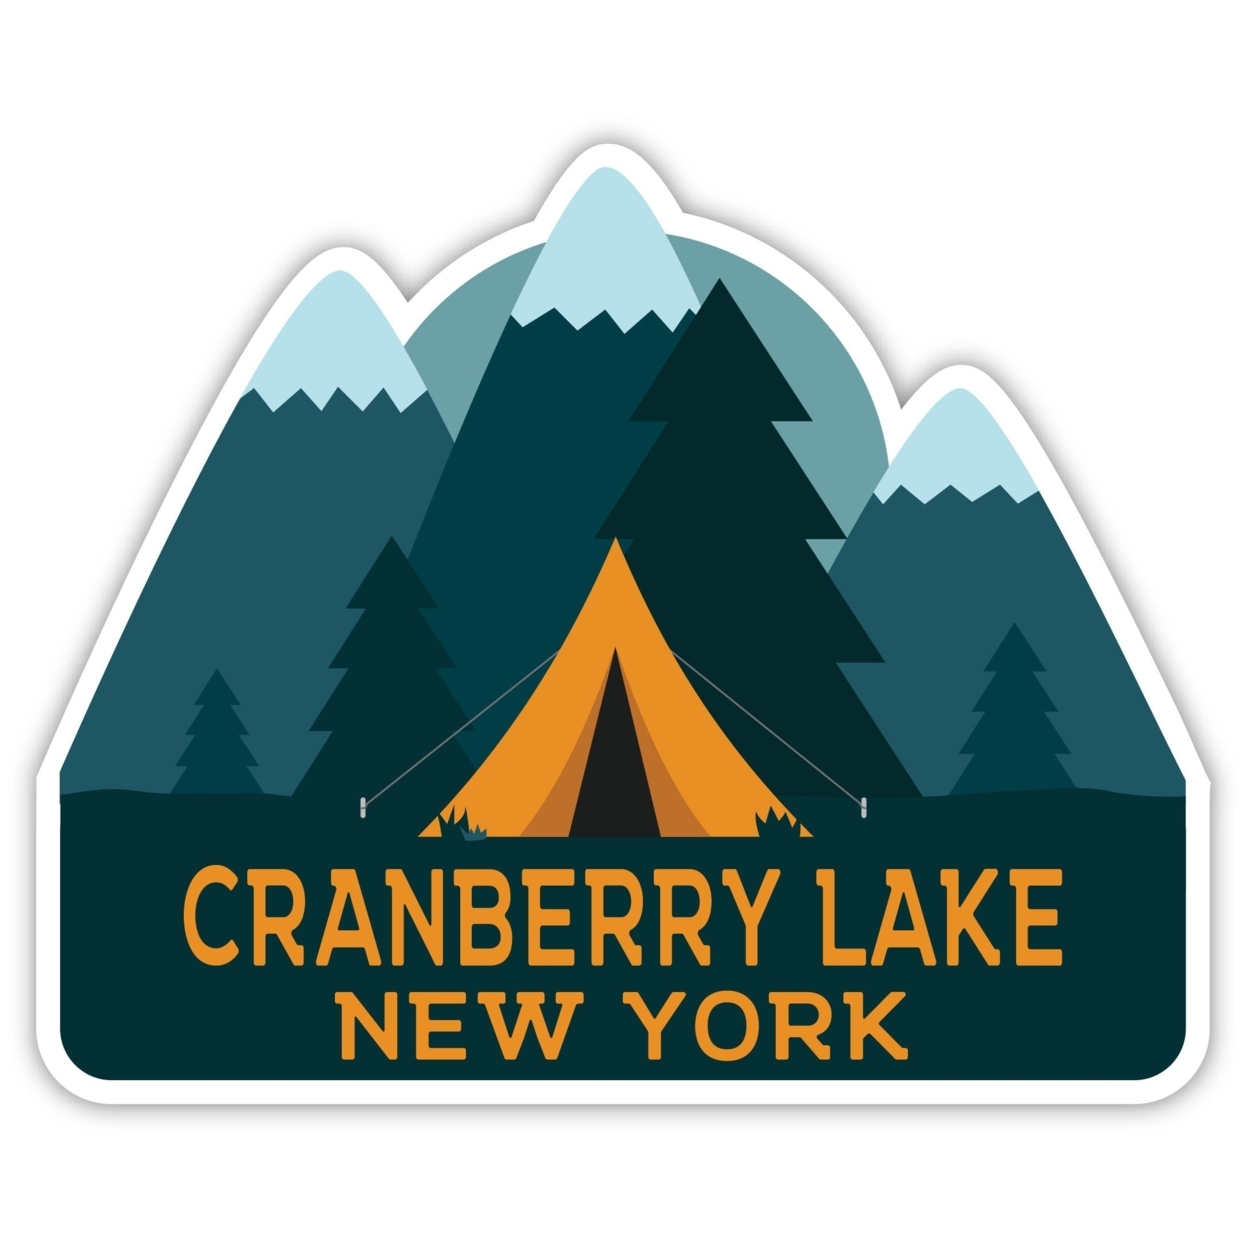 Cranberry Lake New York Souvenir Decorative Stickers (Choose Theme And Size) - 4-Pack, 4-Inch, Adventures Awaits